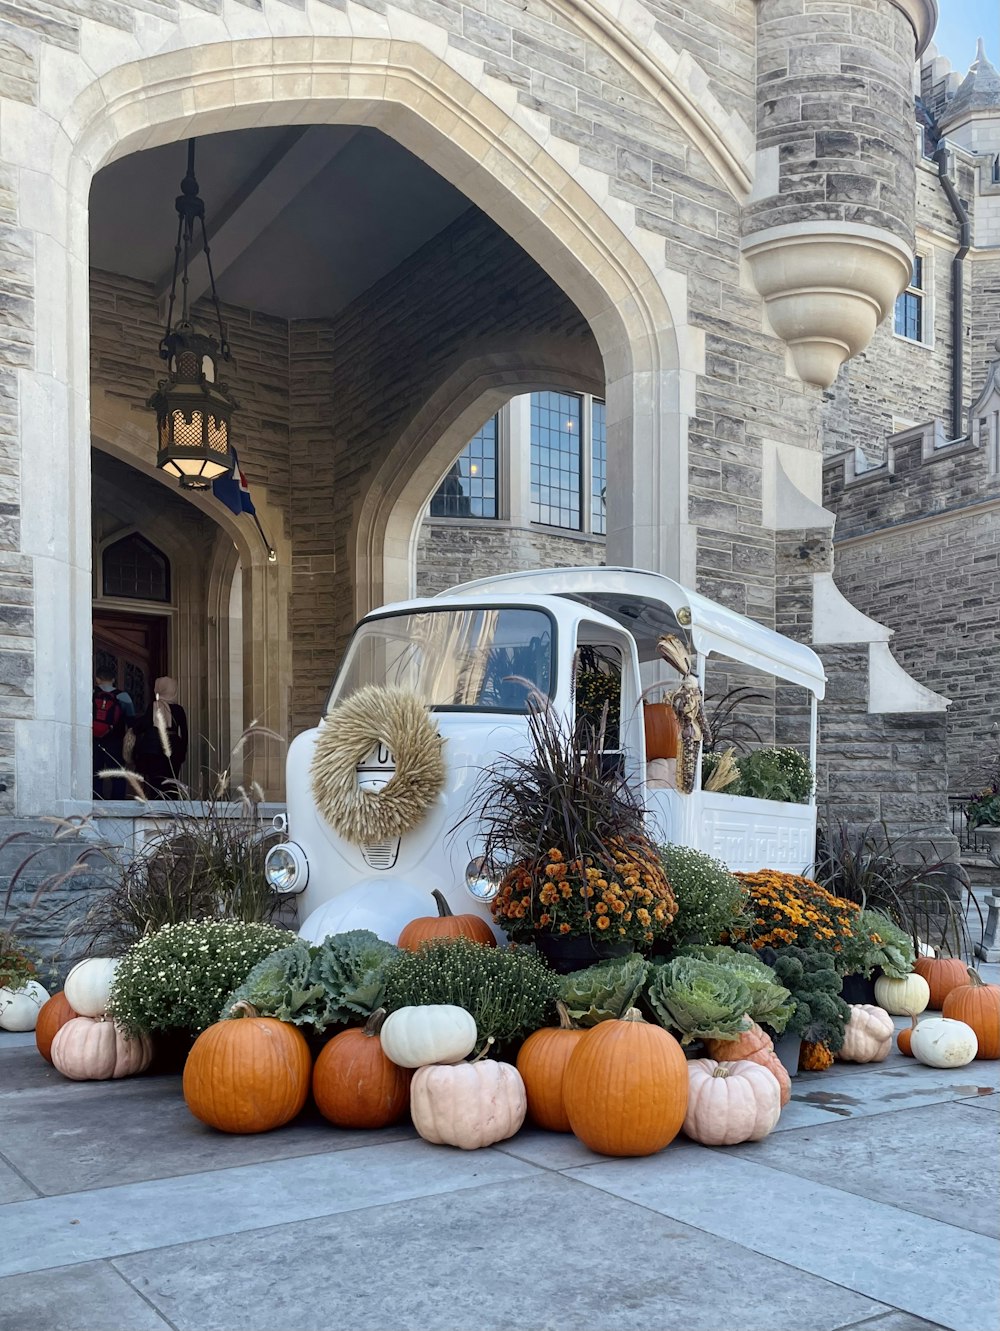 a car parked in front of a building with pumpkins in front